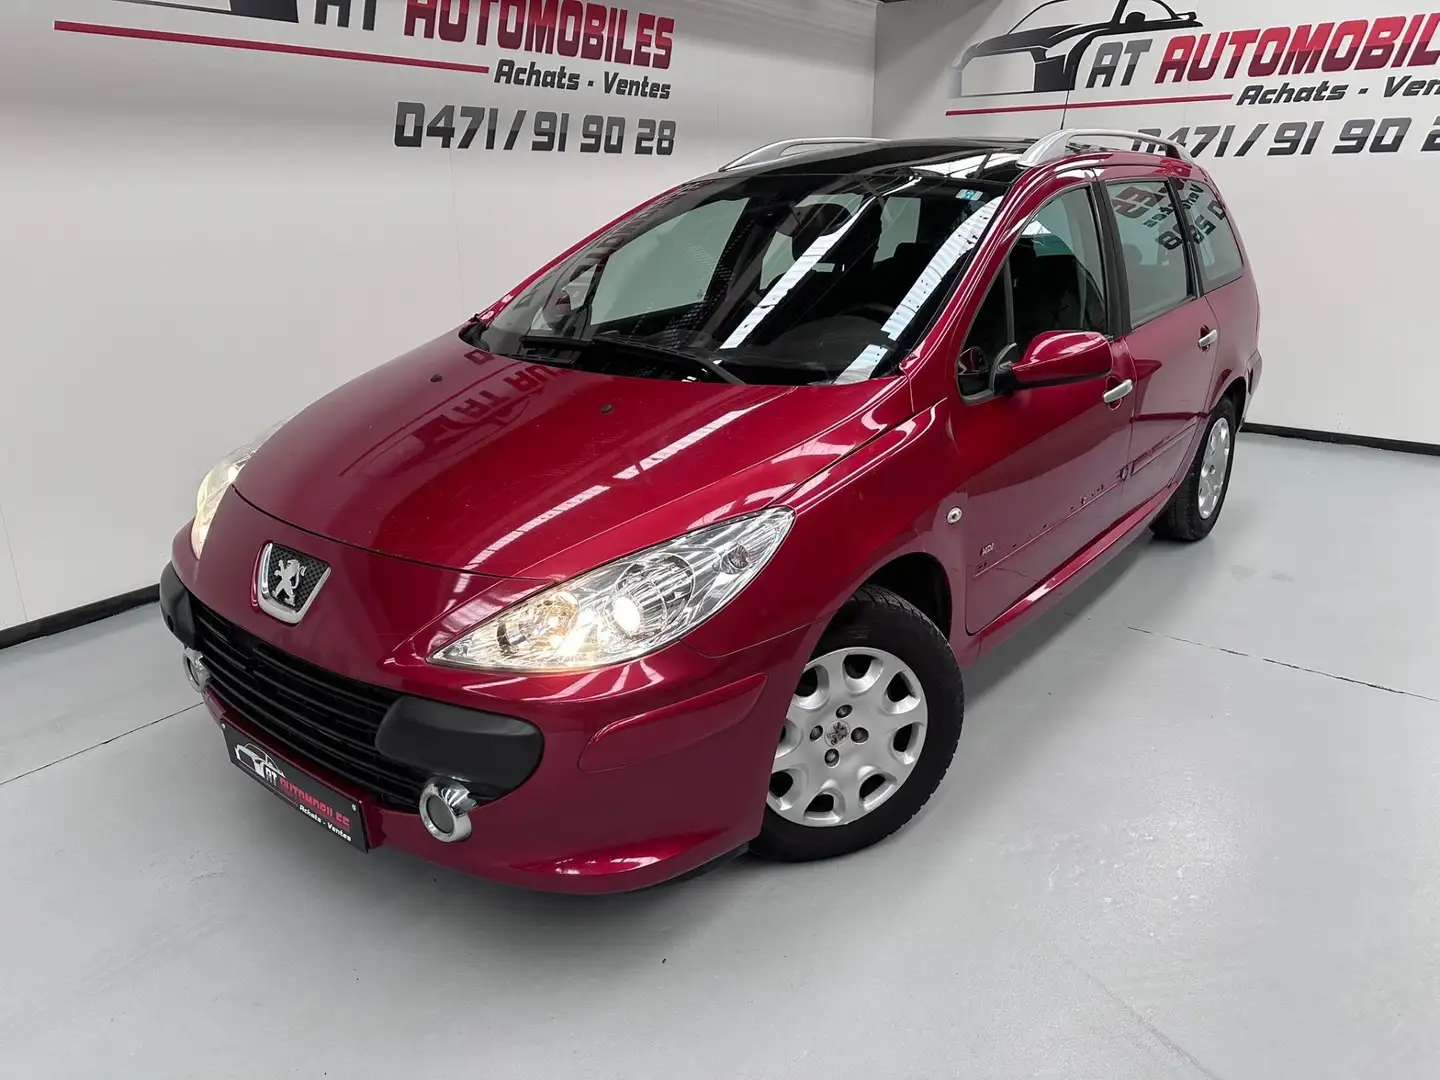 Peugeot 307 1.6 HDI, CT OK Rosso - 1